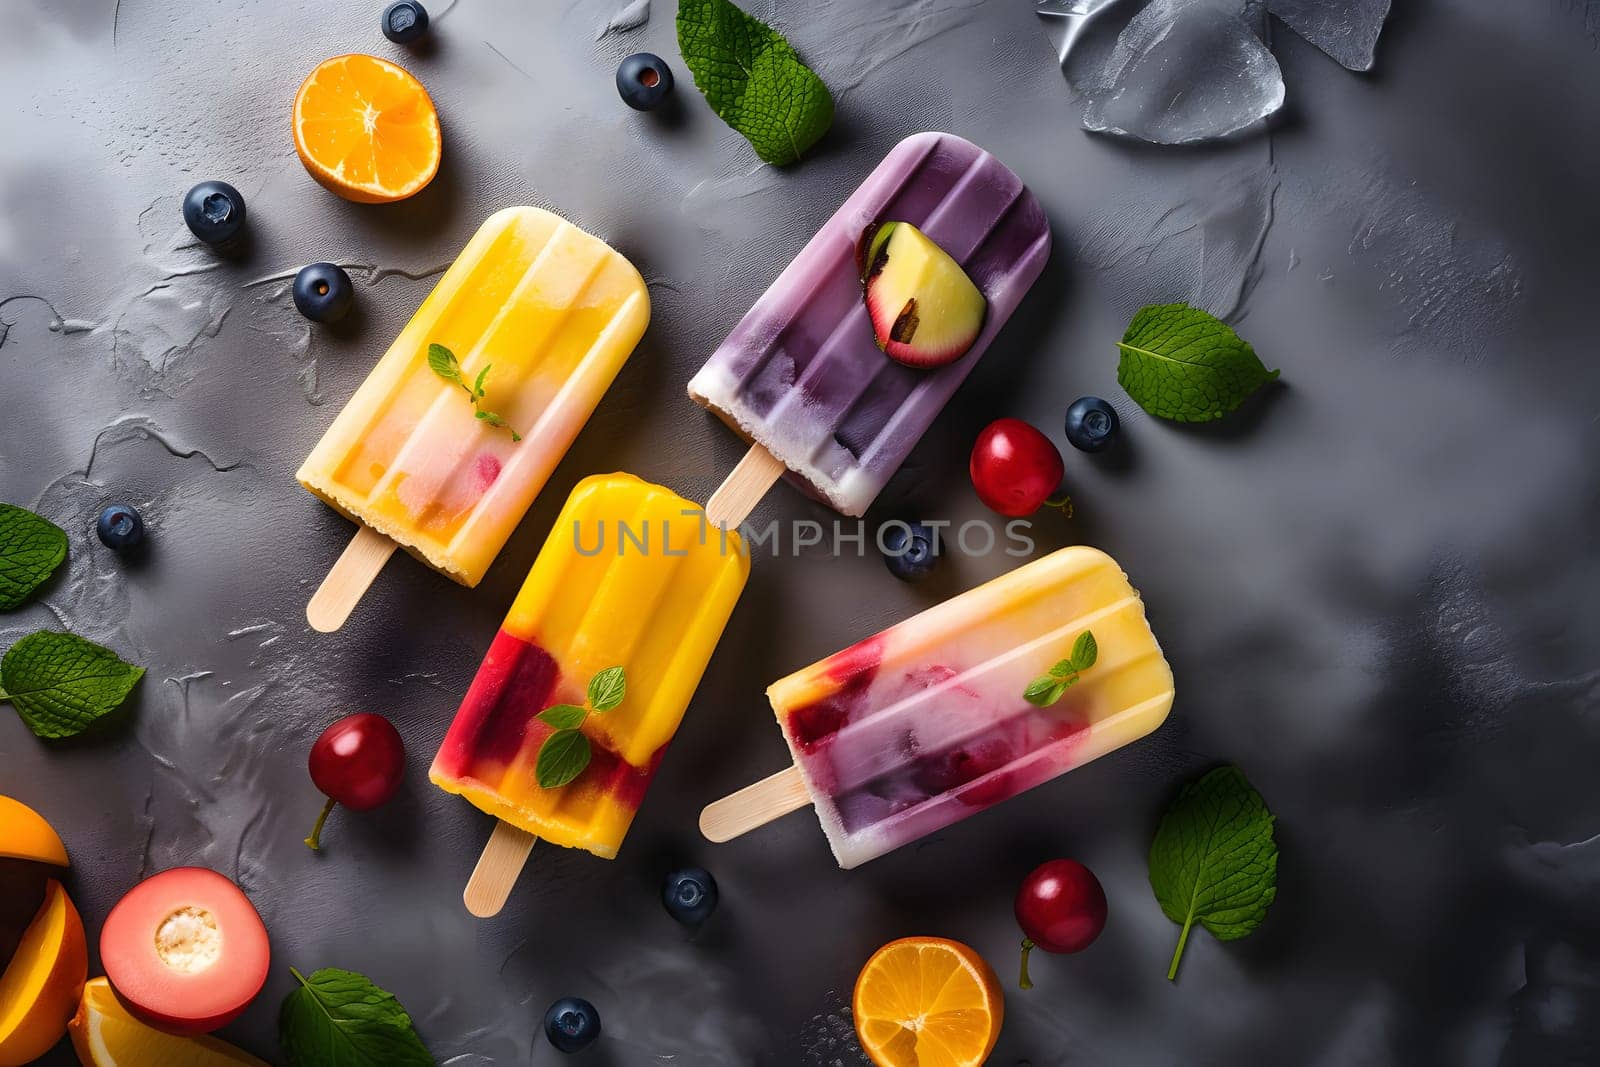 ice cream popsicles with fruits and ice cube on flat surface, high angle view. Neural network generated in May 2023. Not based on any actual person, scene or pattern.